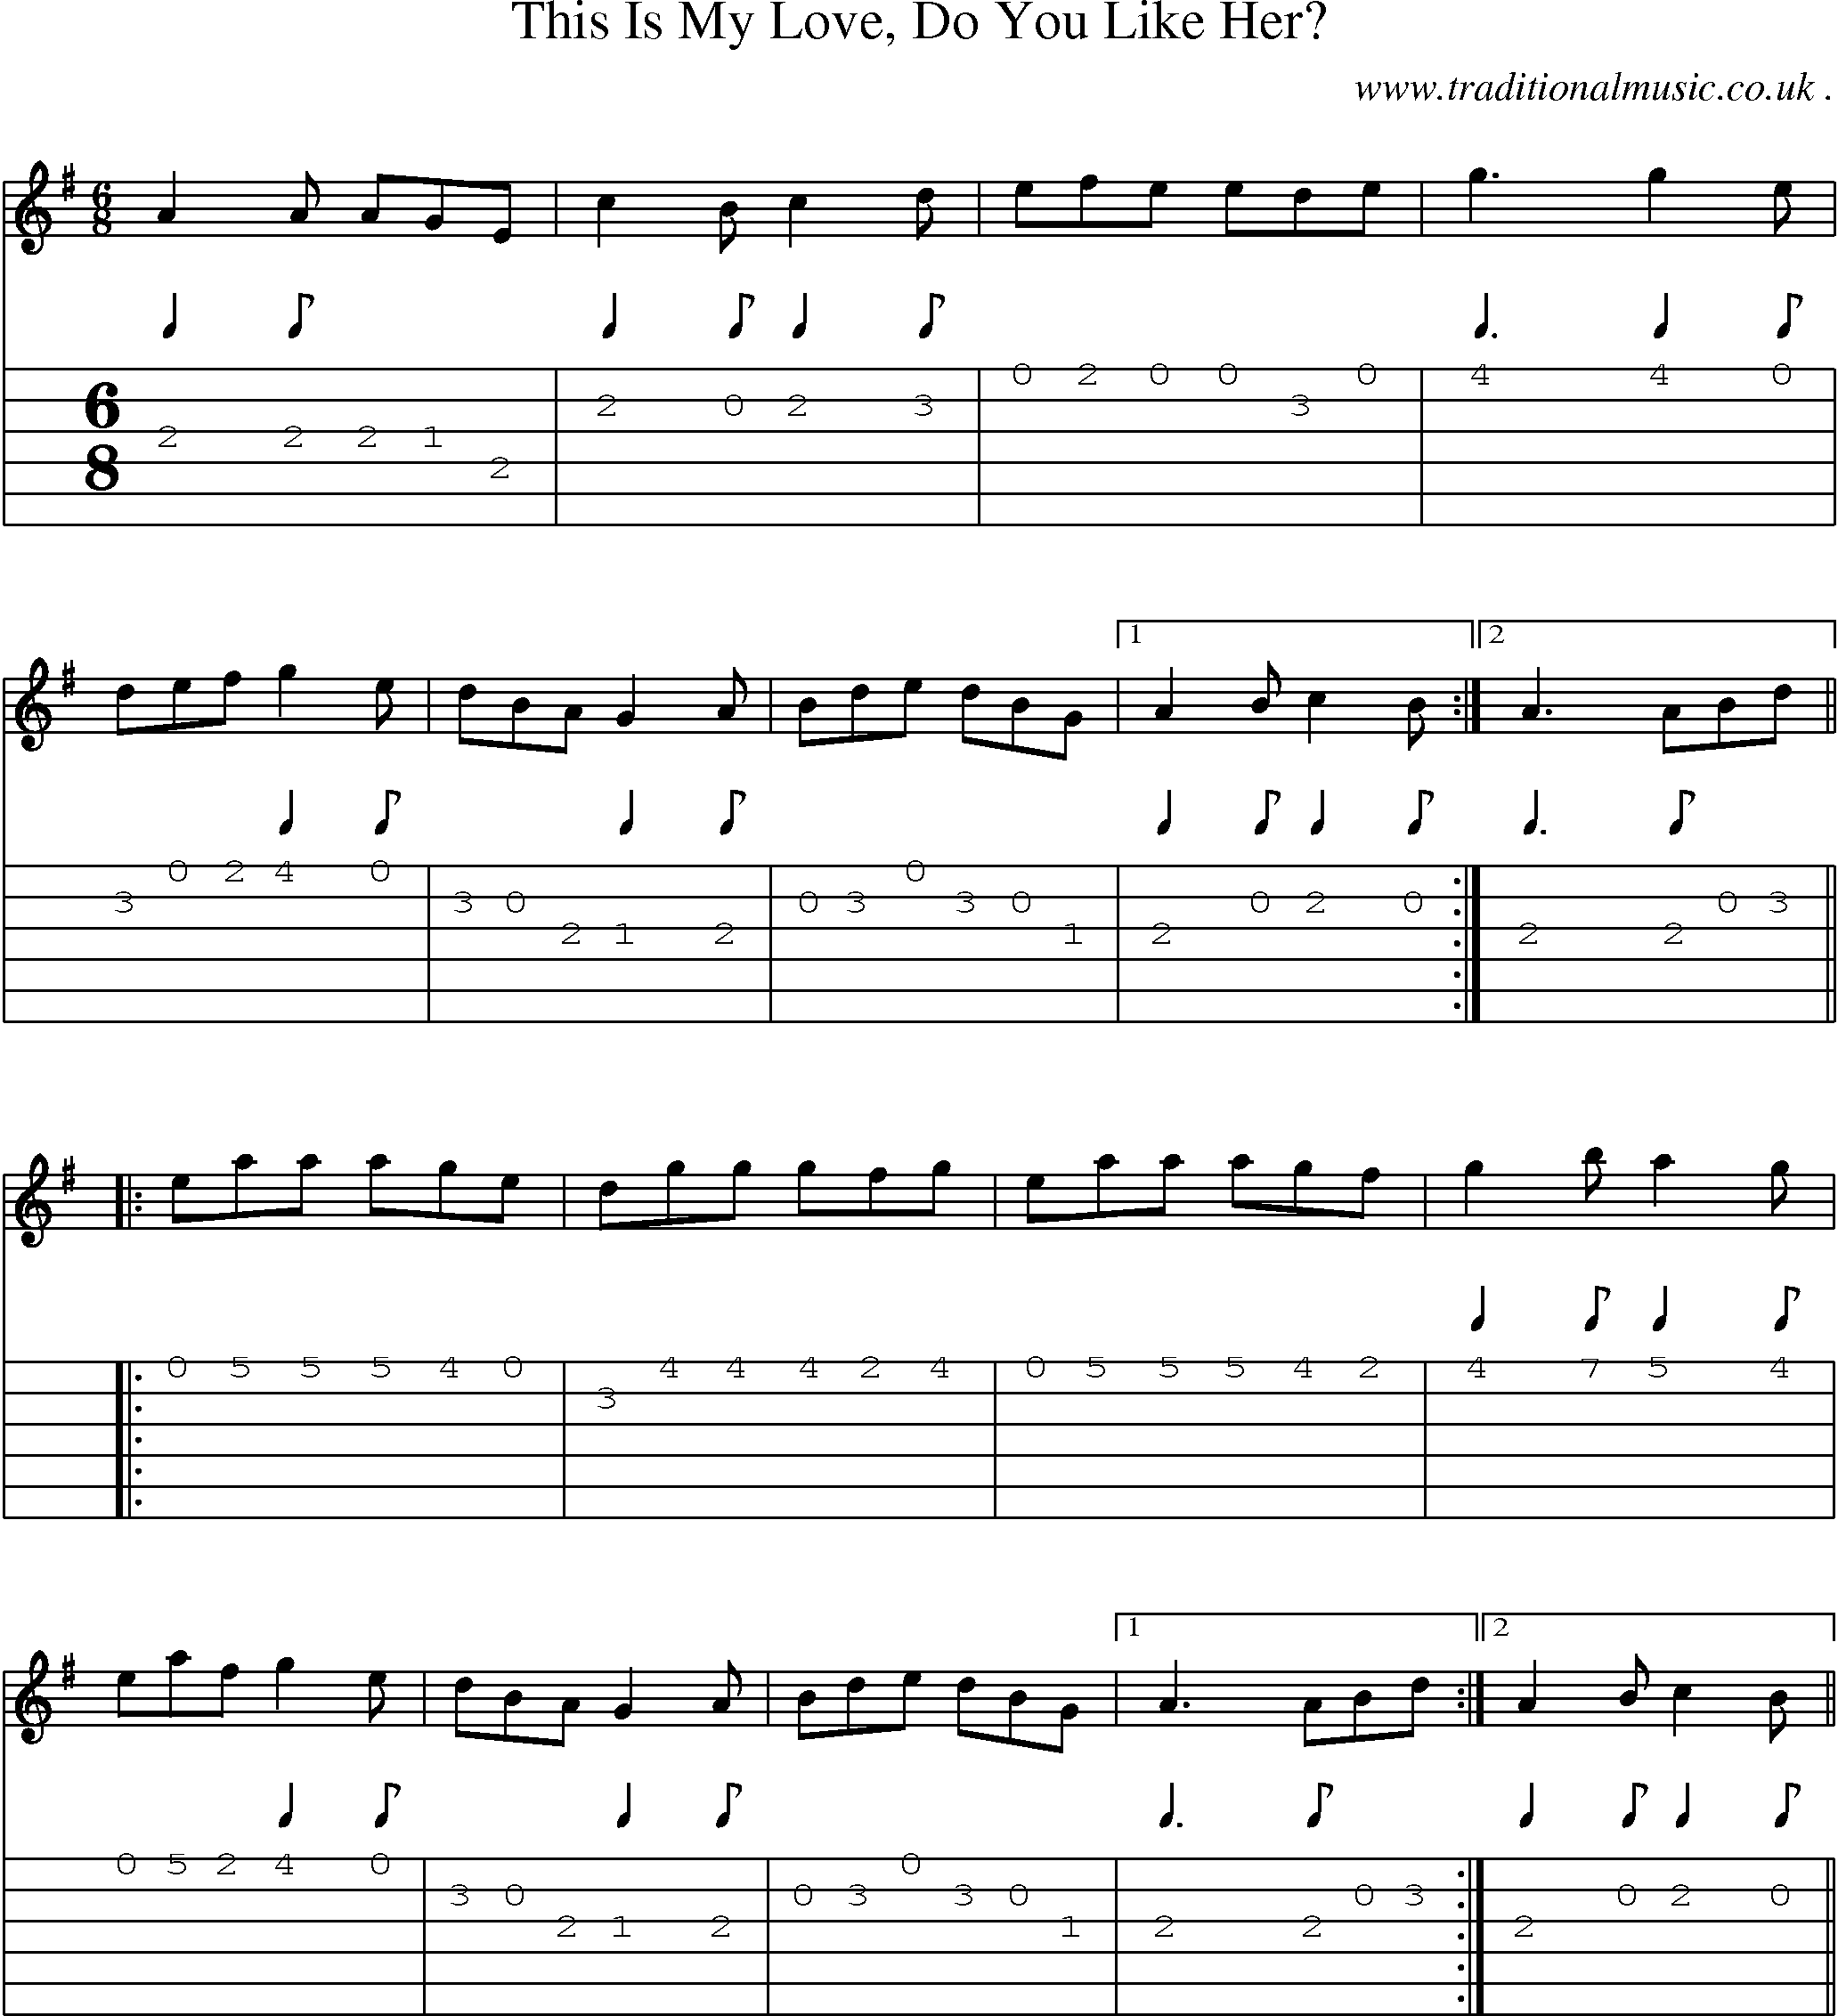 Sheet-Music and Guitar Tabs for This Is My Love Do You Like Her